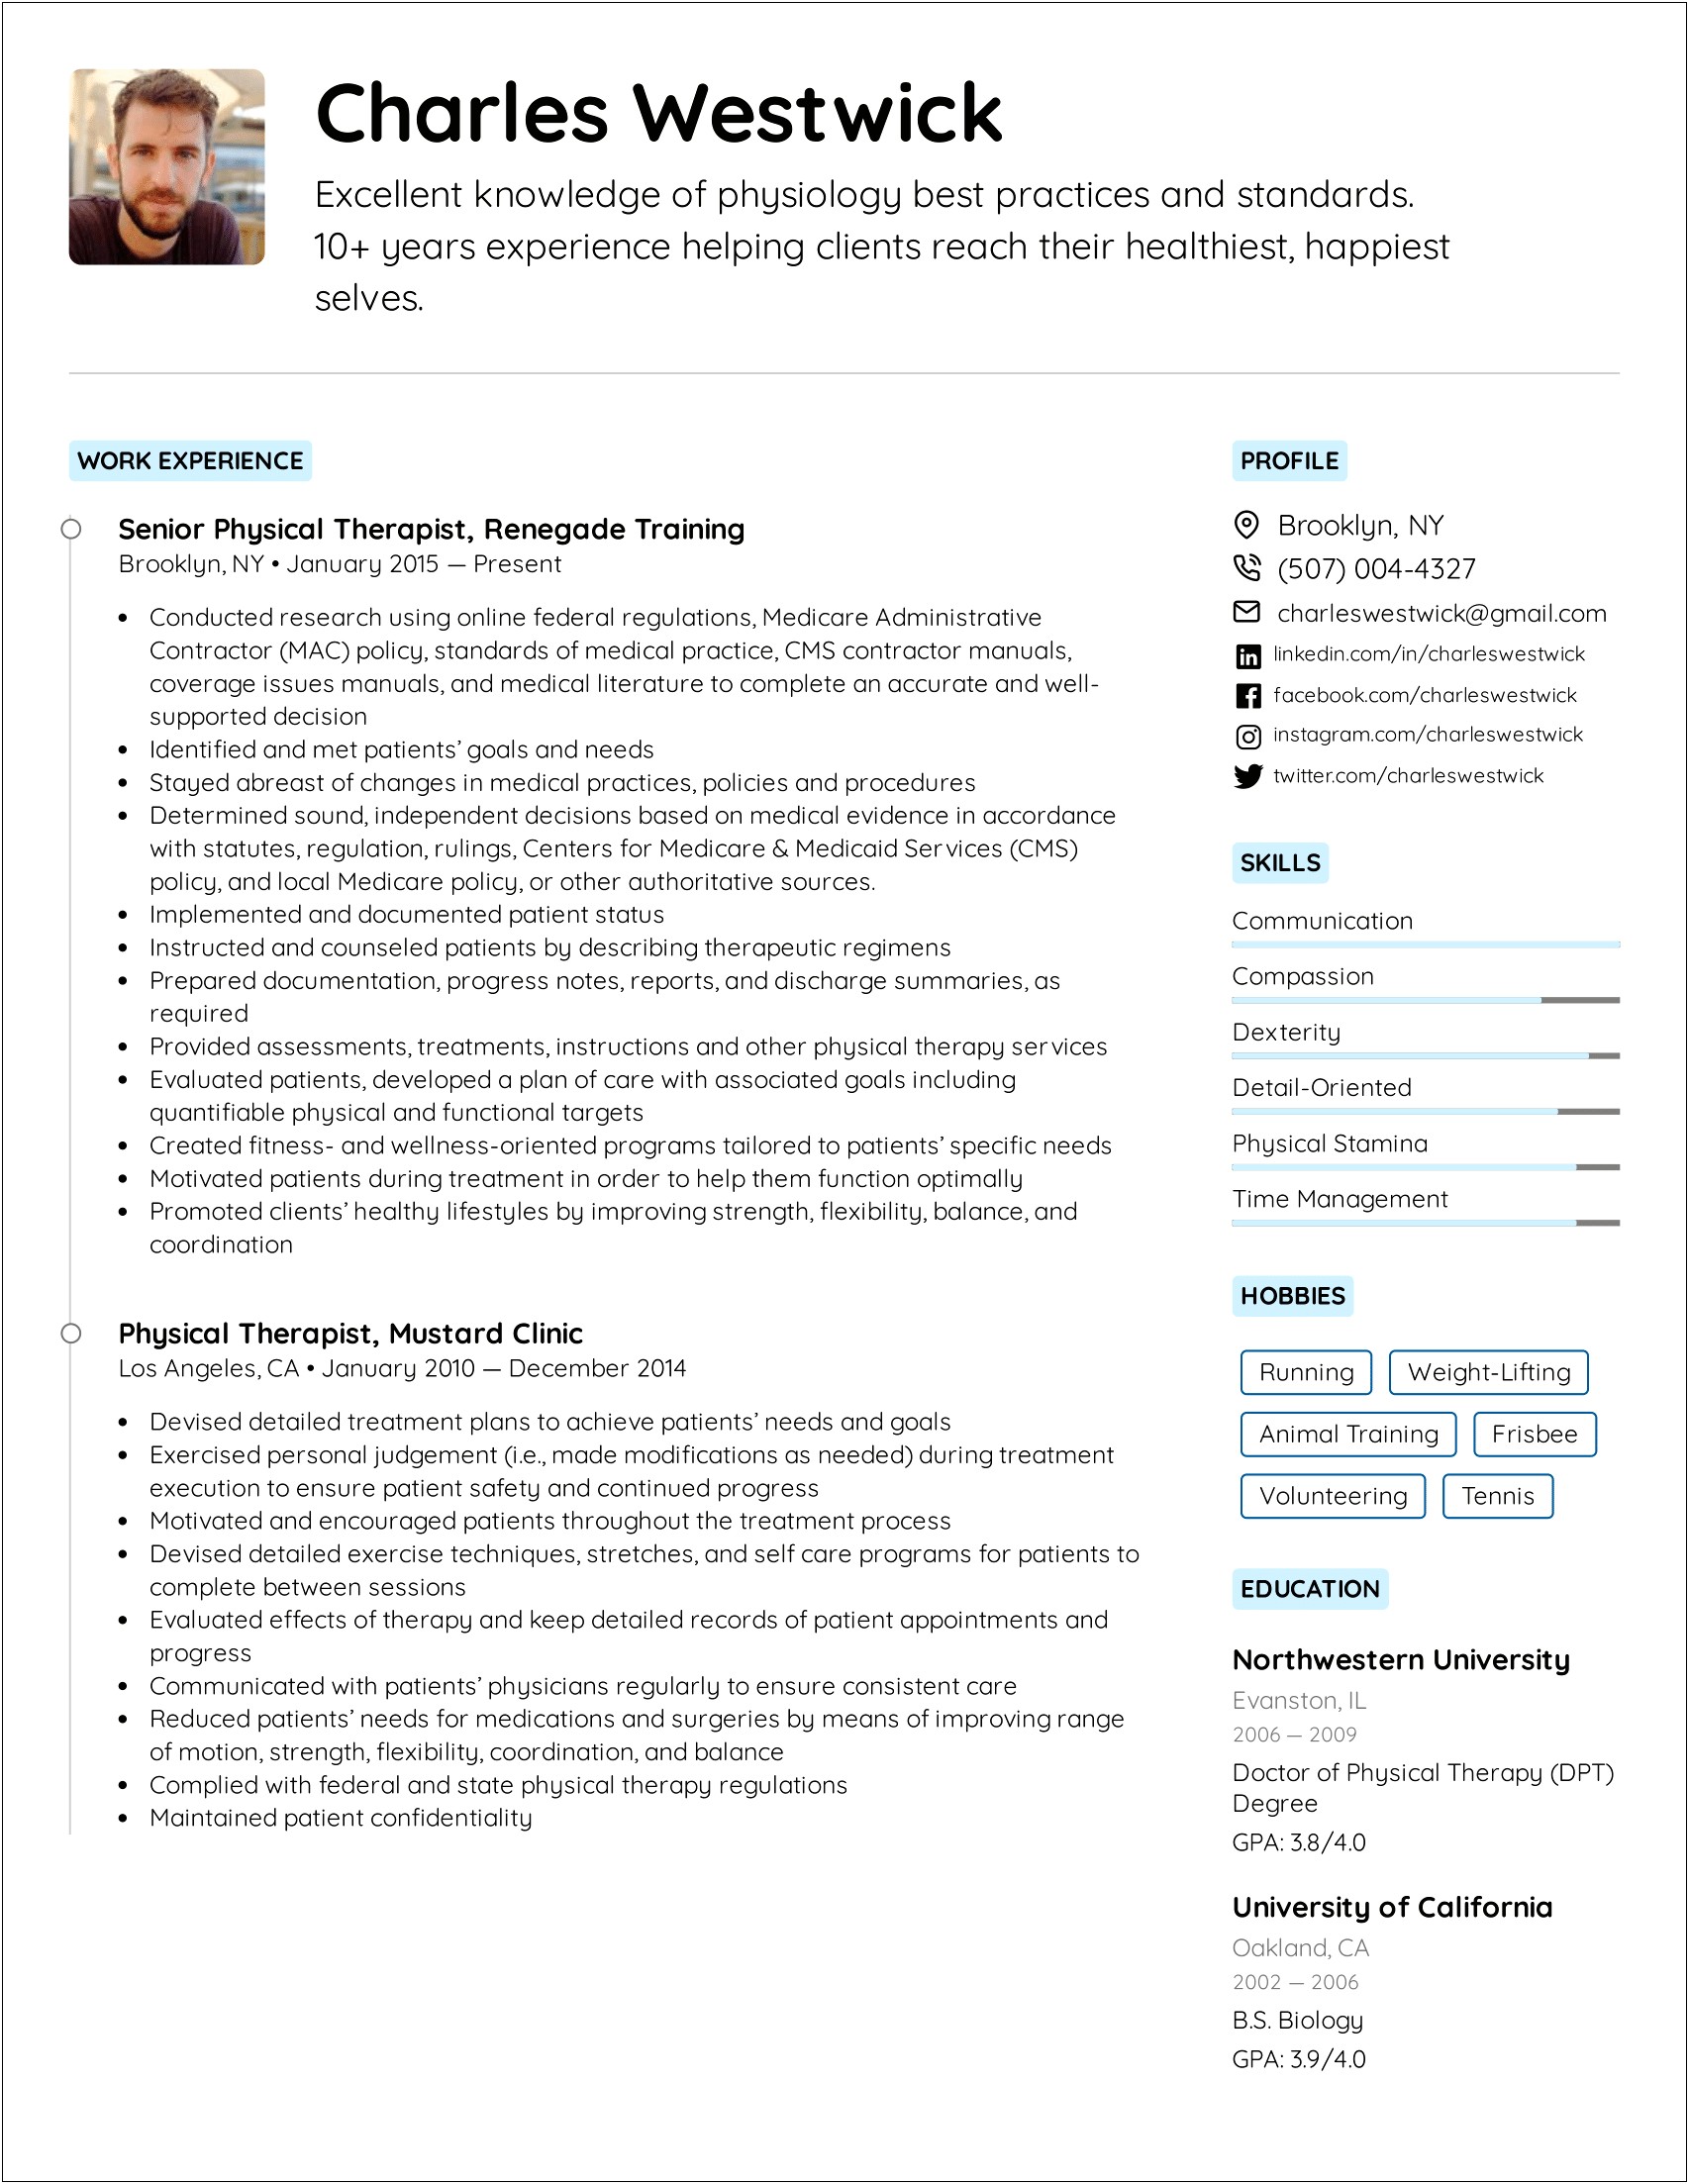 Skills For A Counselor Resume